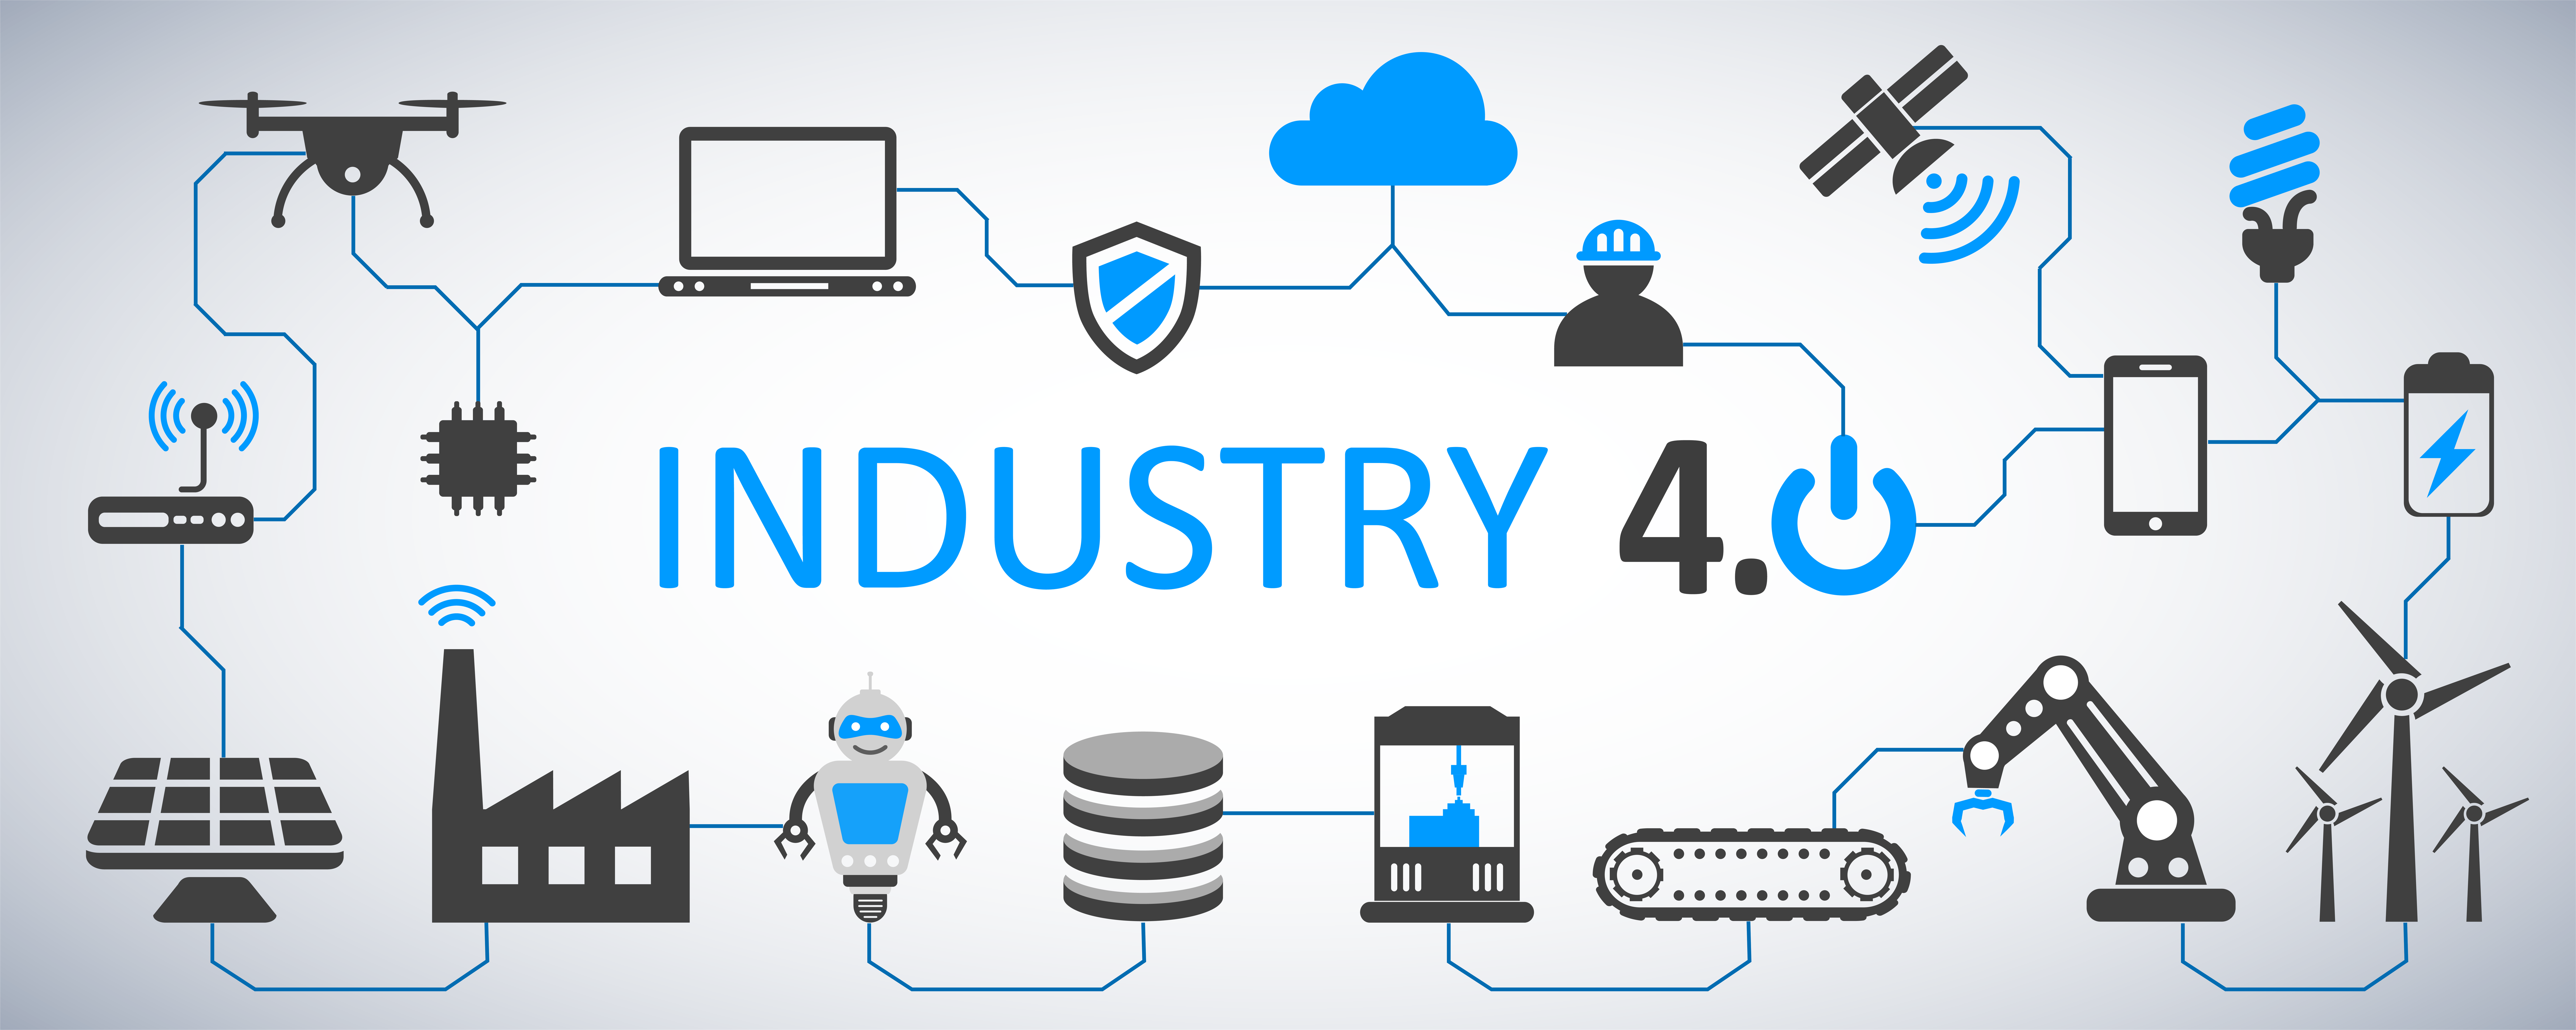 Cloud Computing and the Industry 4.0